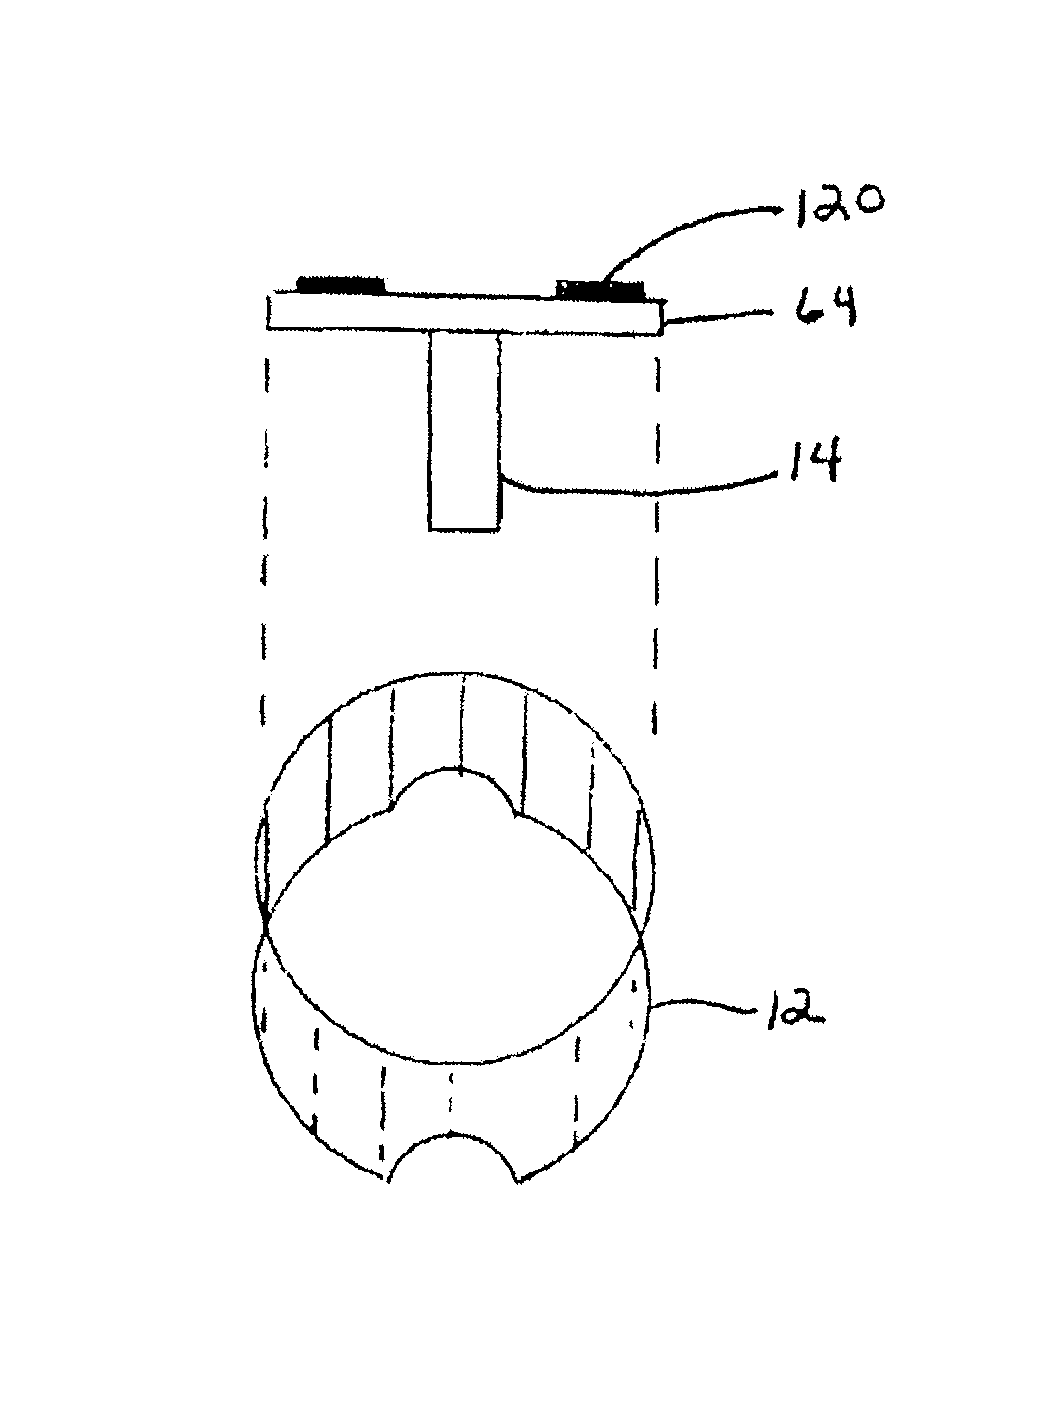 Facet joint fusion device and method for using same